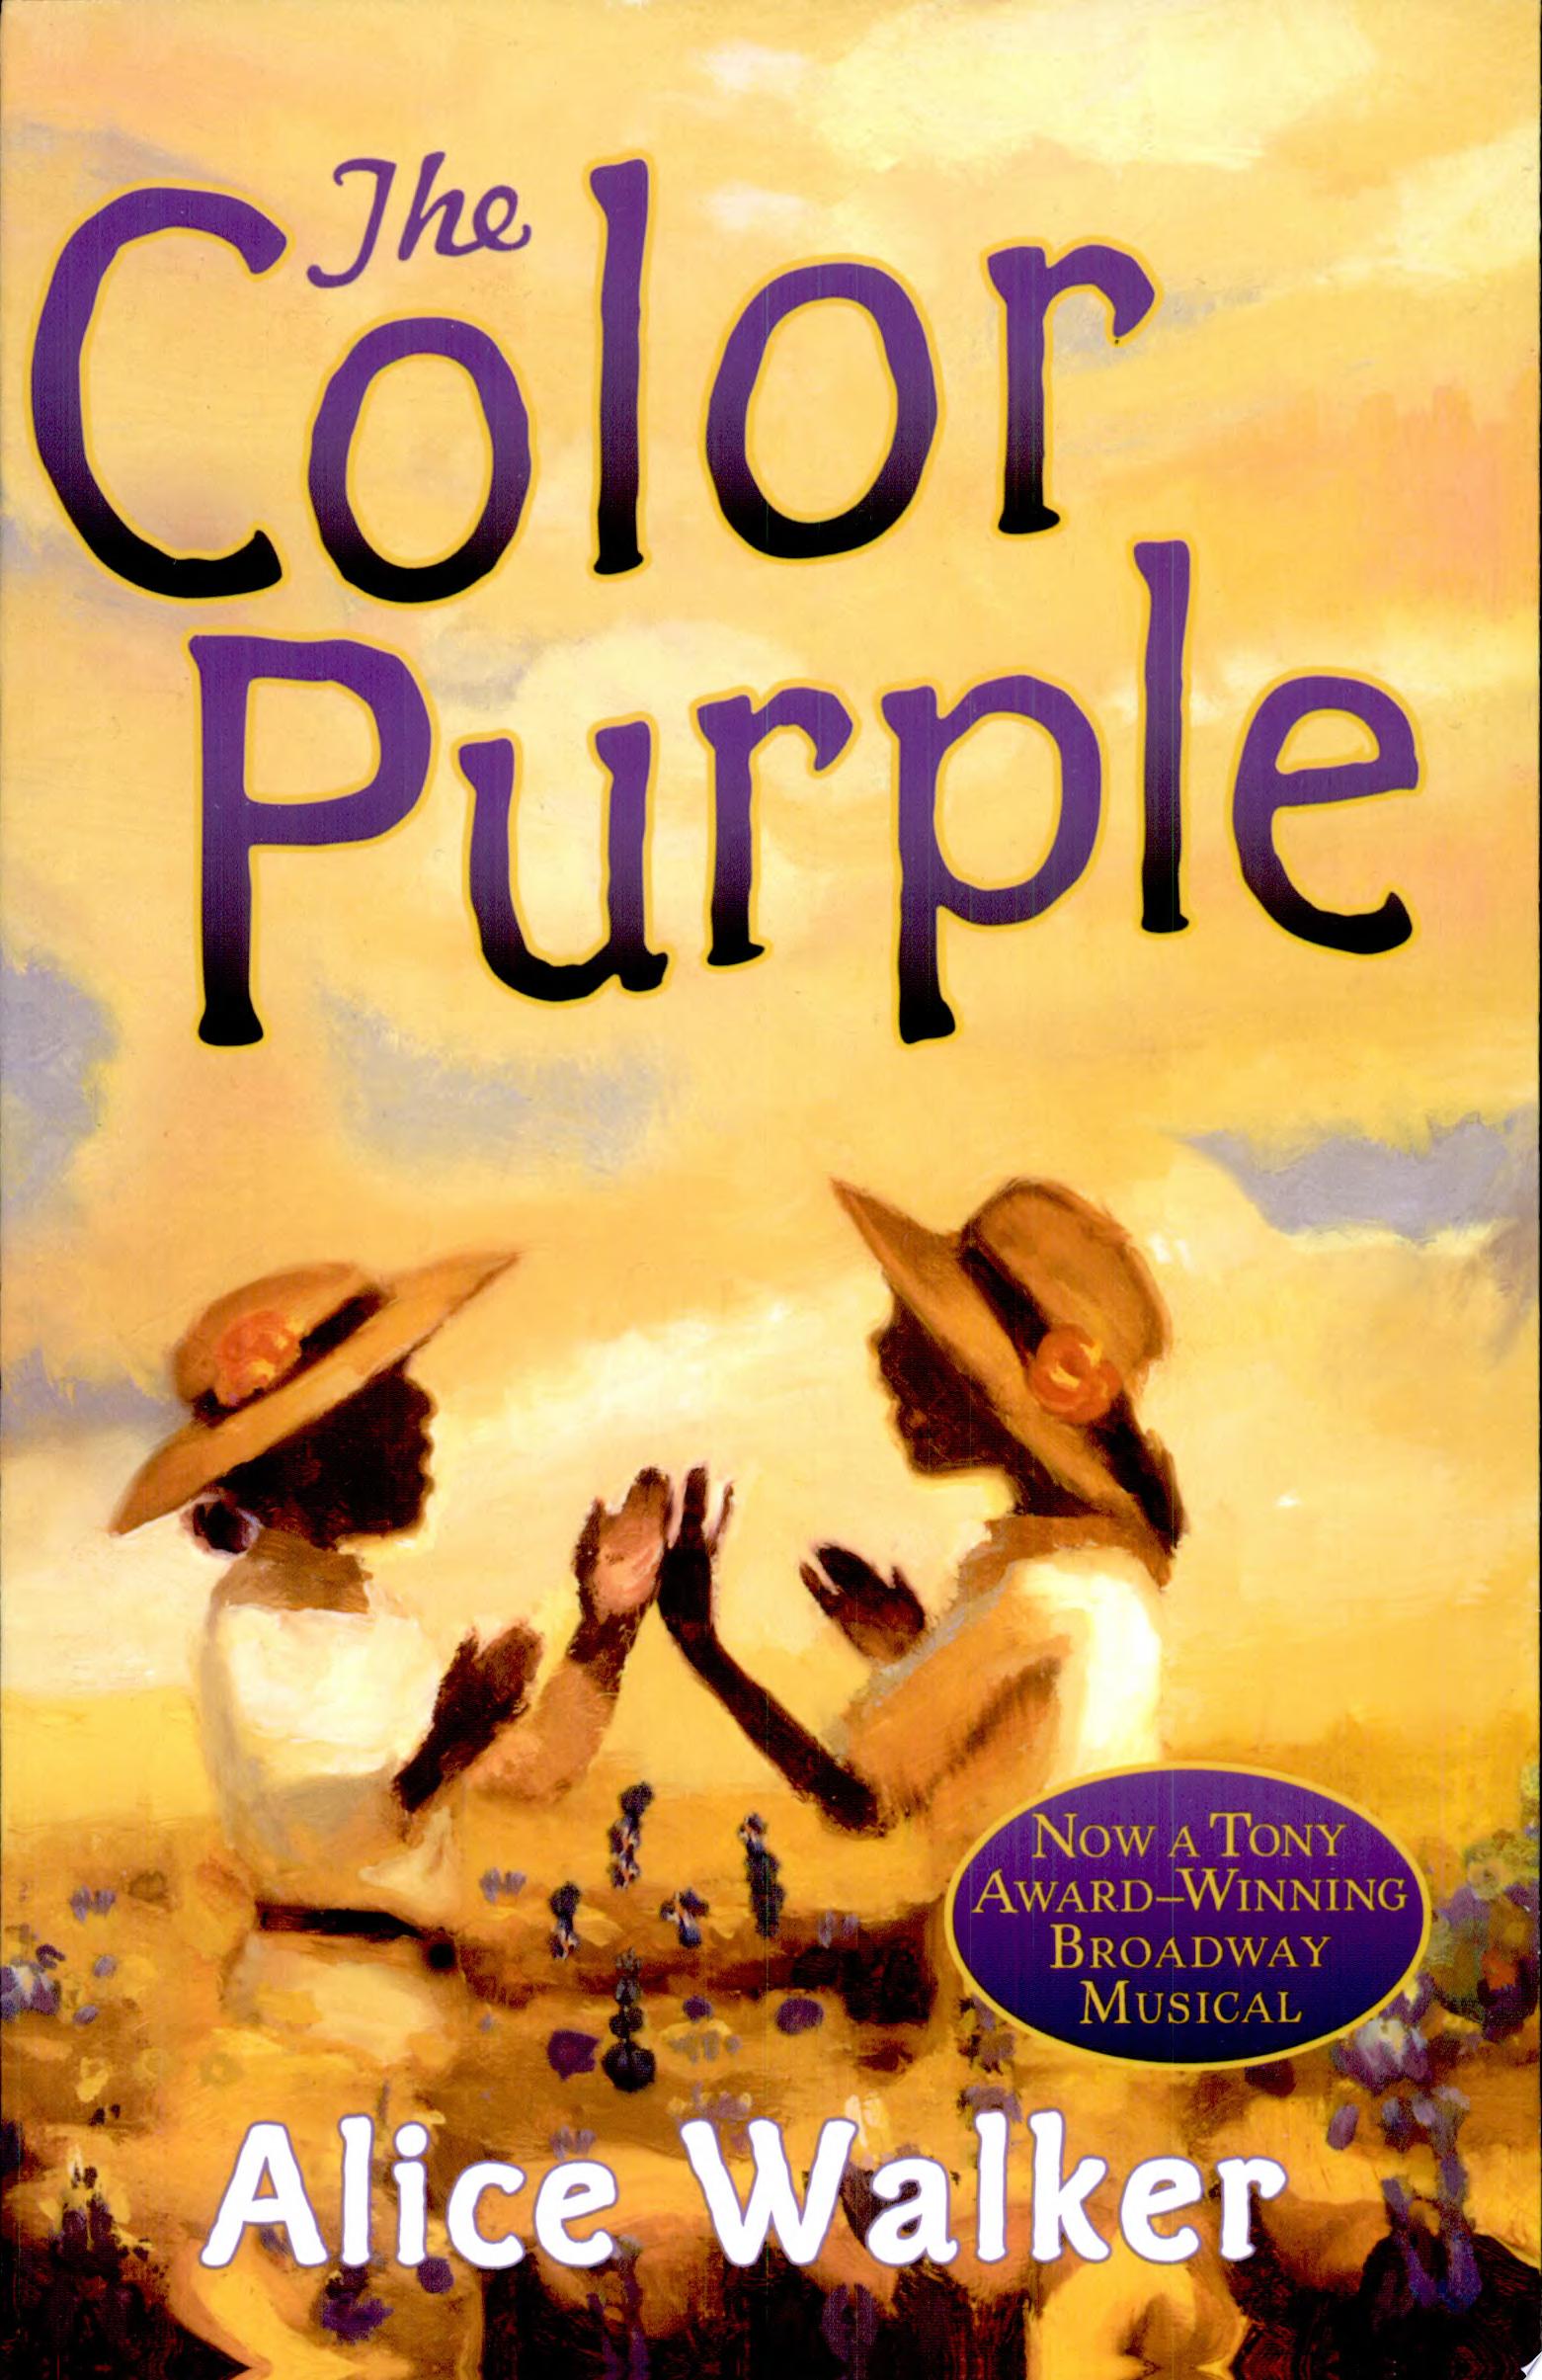 Image for "The Color Purple"